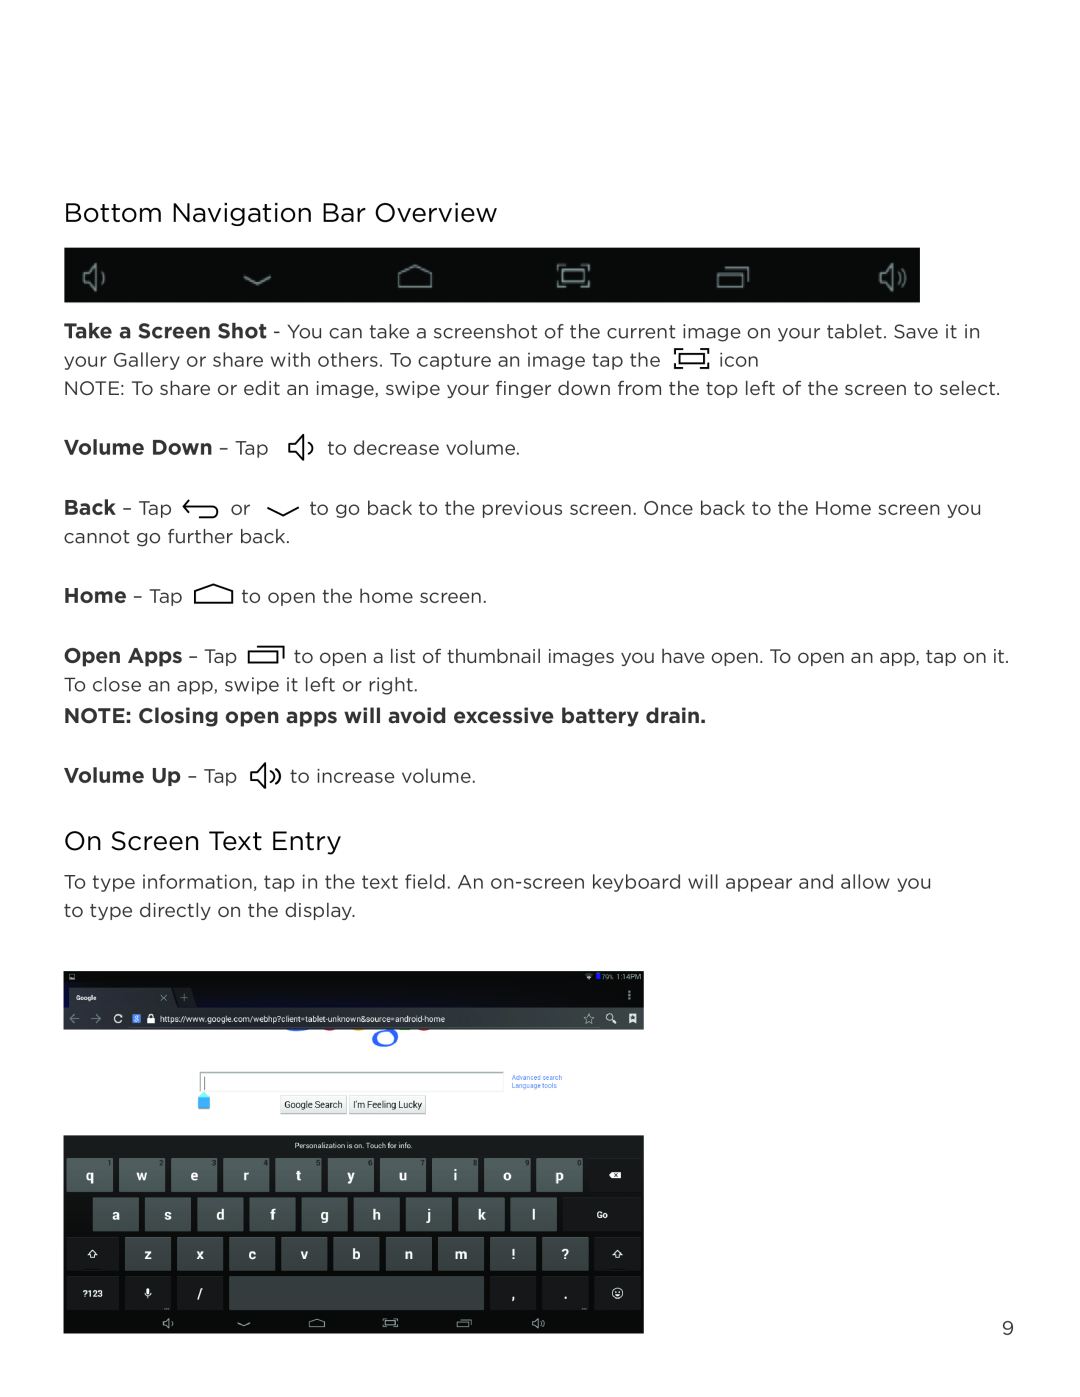 NuVision TM1218 user manual Bottom Navigation Bar Overview, On Screen Text Entry, Volume Down - Tap 